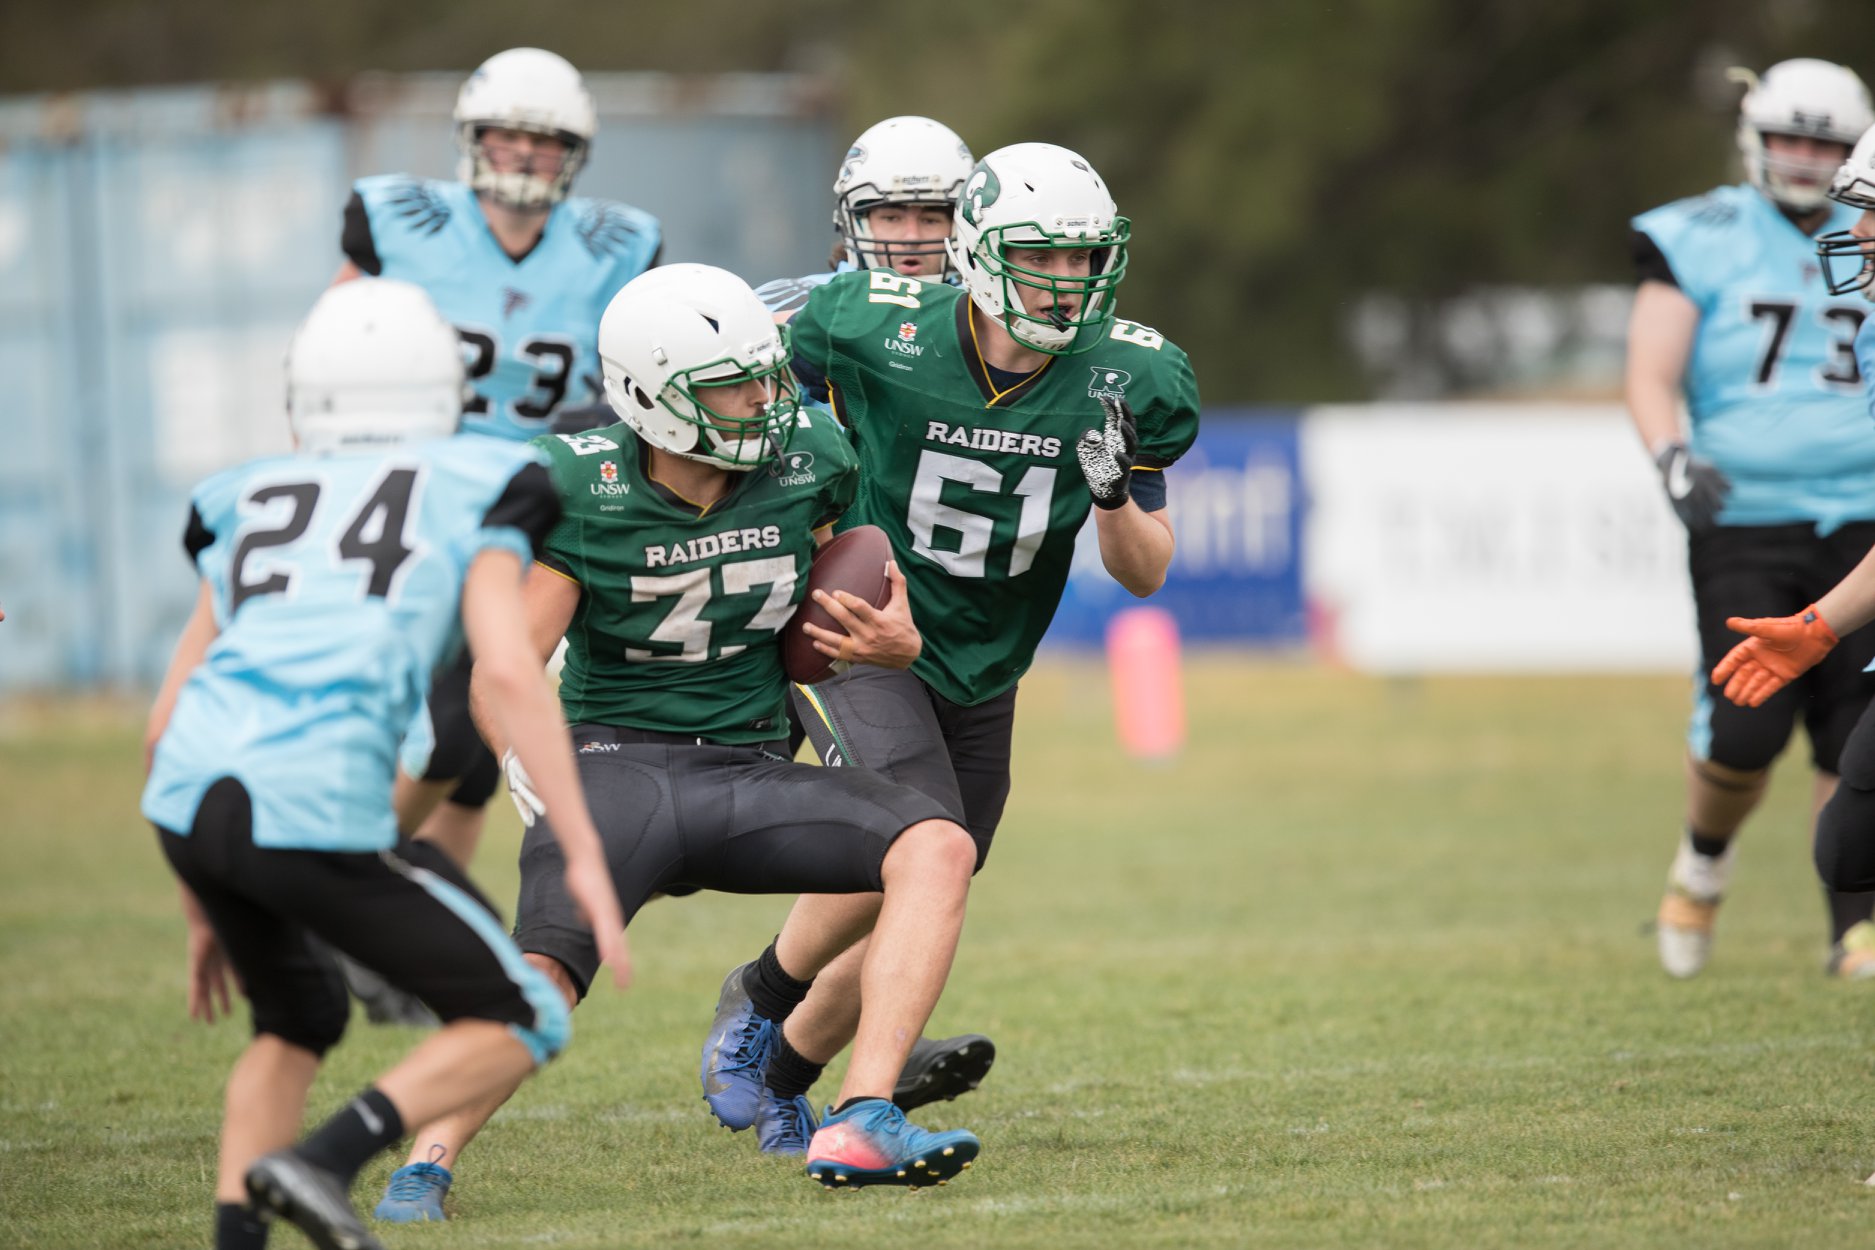 The UNSW Raiders Colts team had strong development this season and are now looking to 2020.